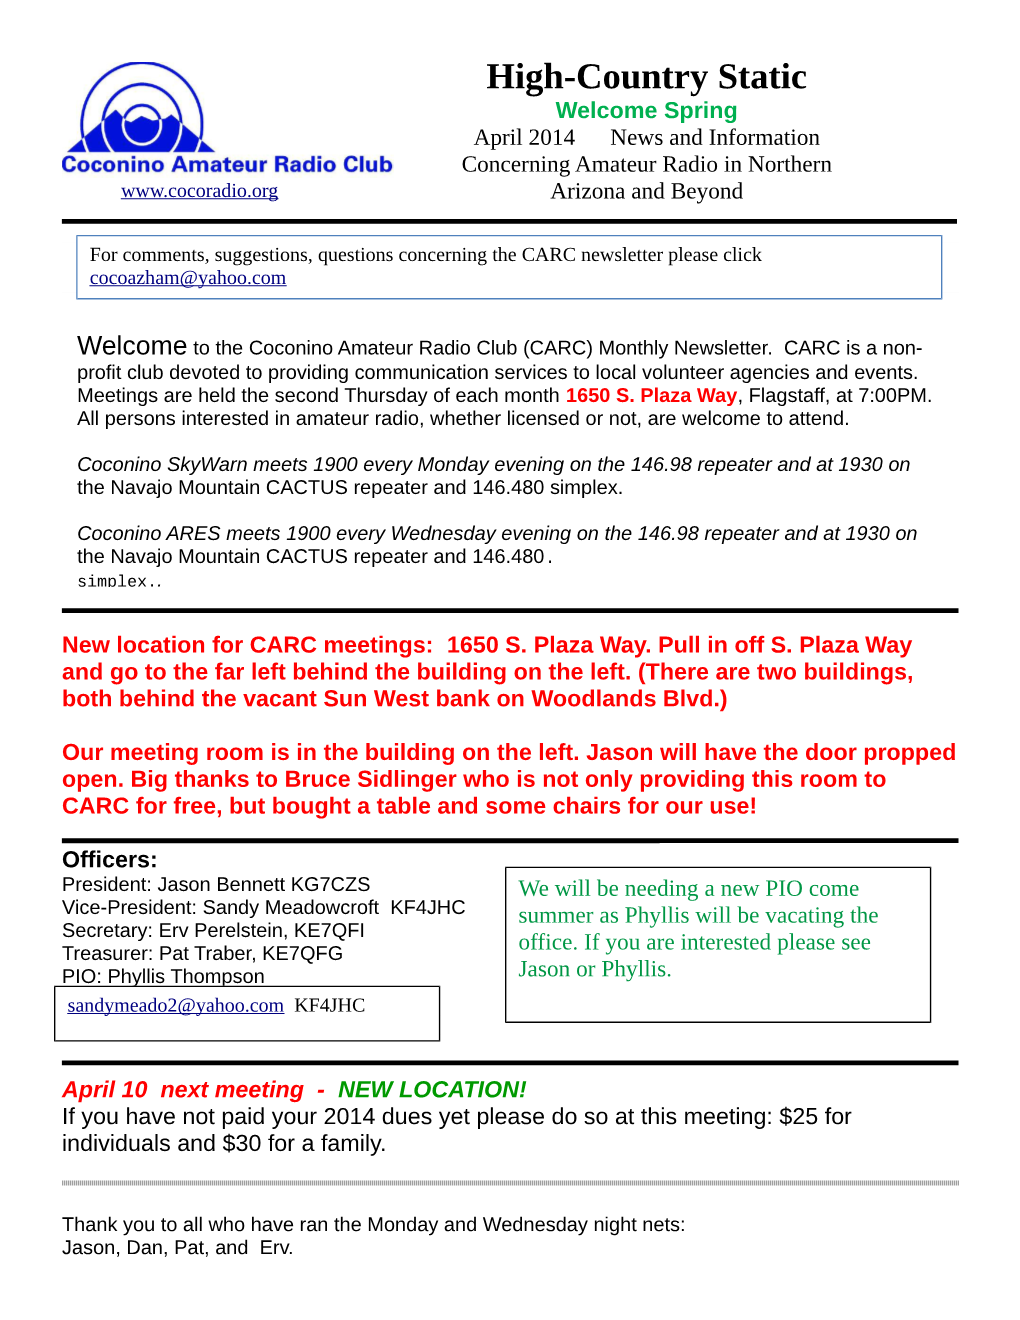 High-Country Static Welcome Spring April 2014 News and Information Concerning Amateur Radio in Northern Arizona and Beyond